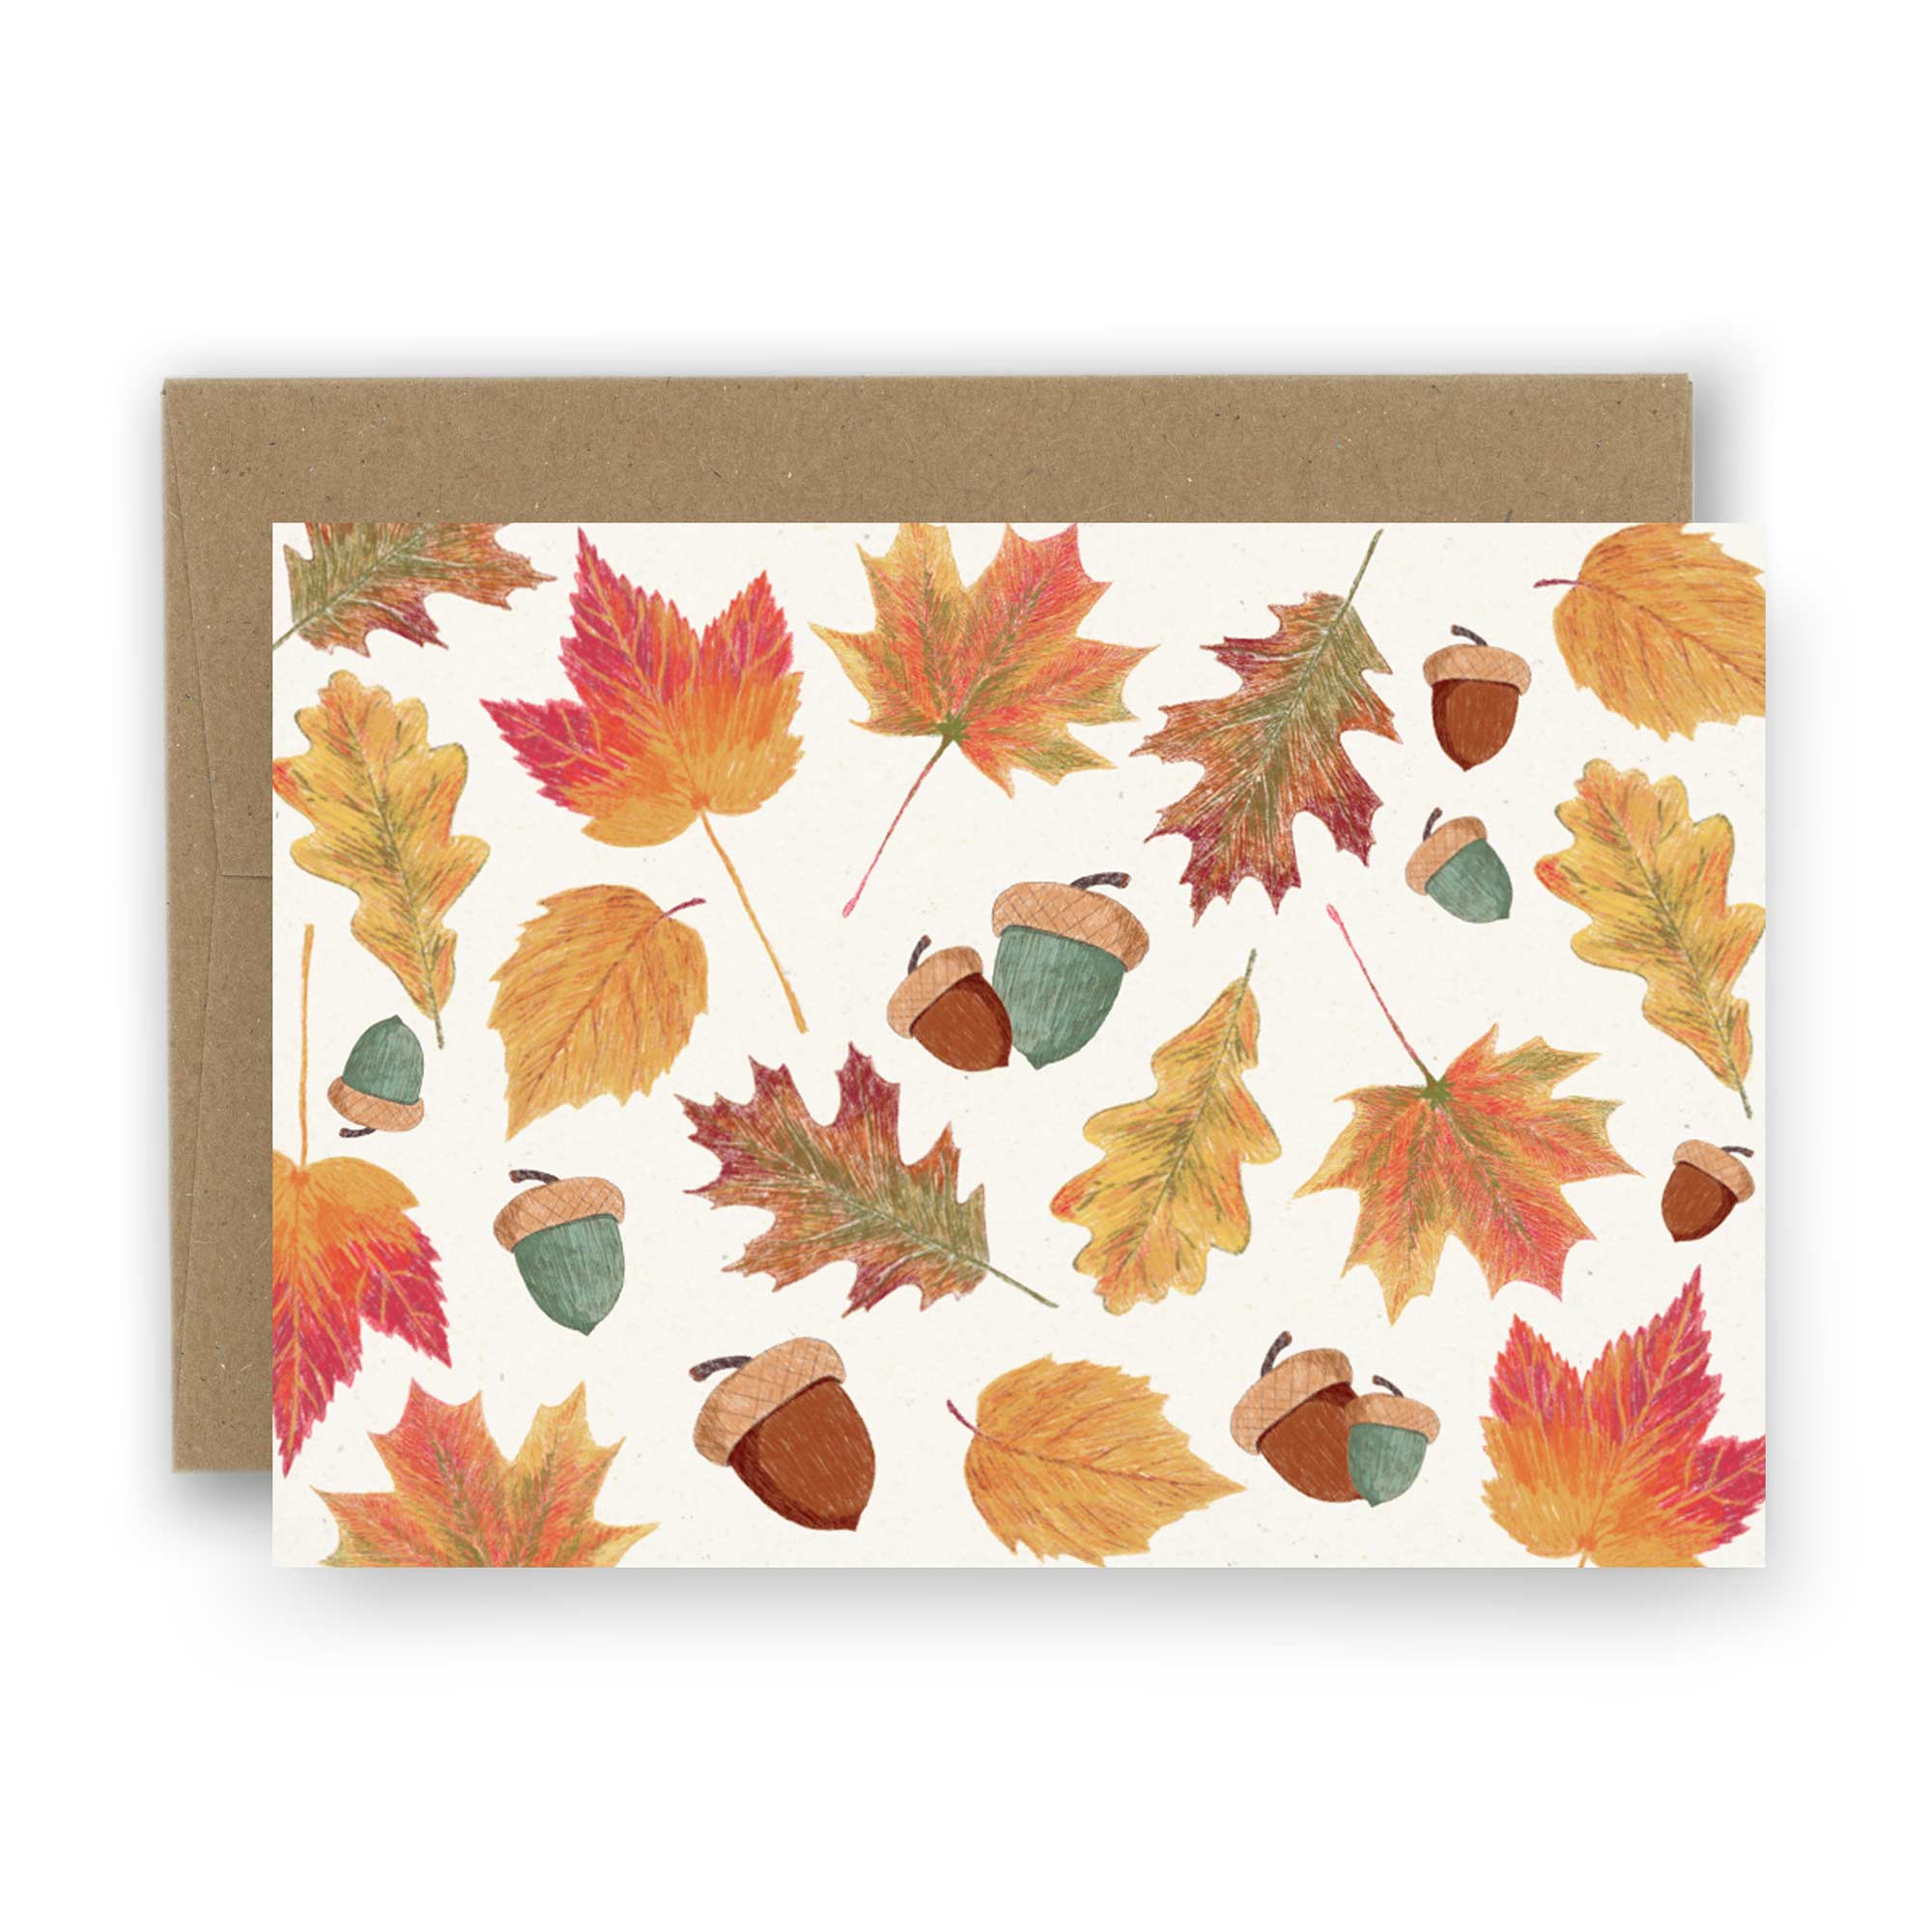 Notecard with fall leaves and acorns.